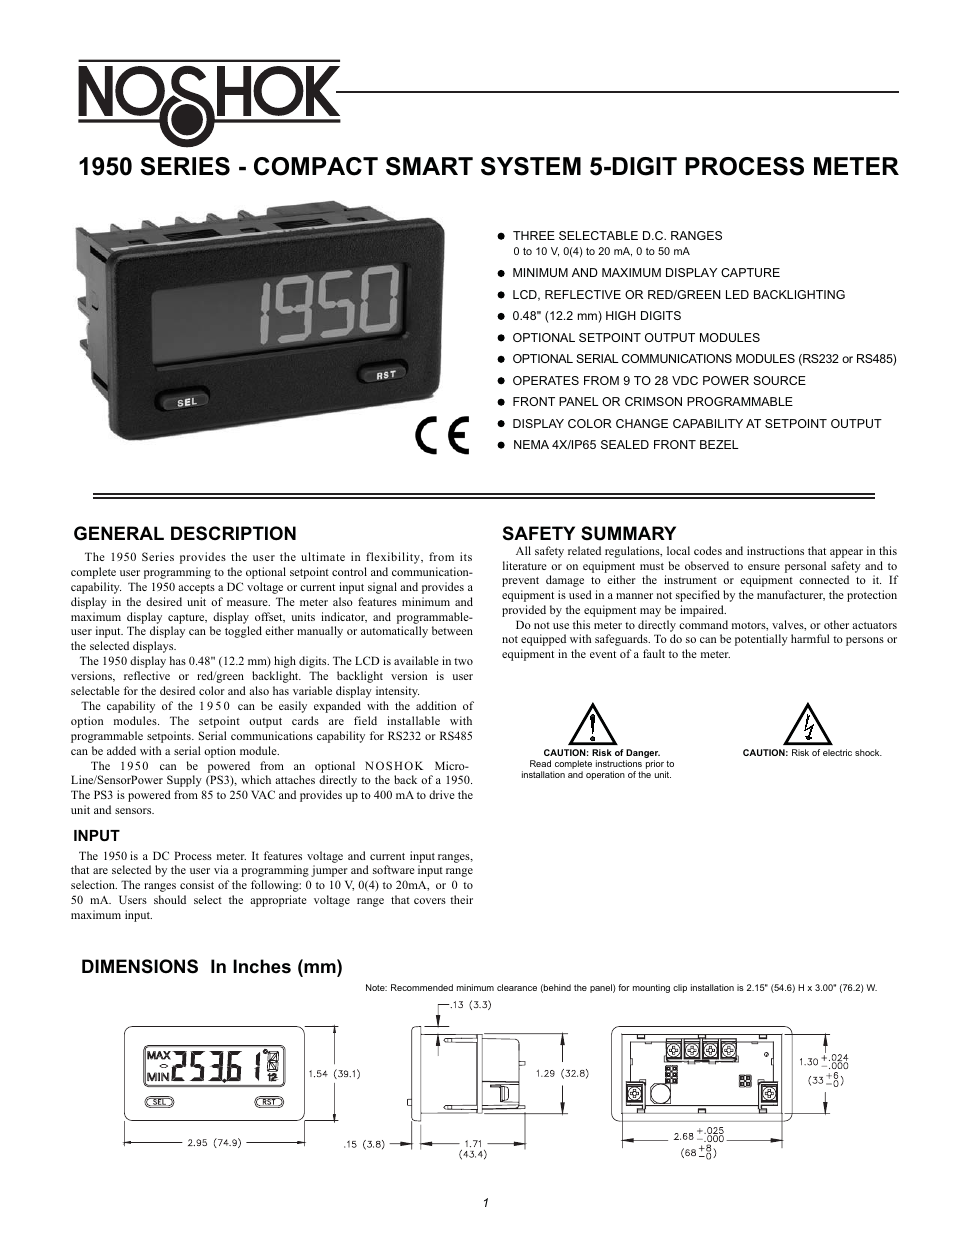 NOSHOK 1950 Series Compact Smart System 5-Digit Process Meter User Manual | 16 pages